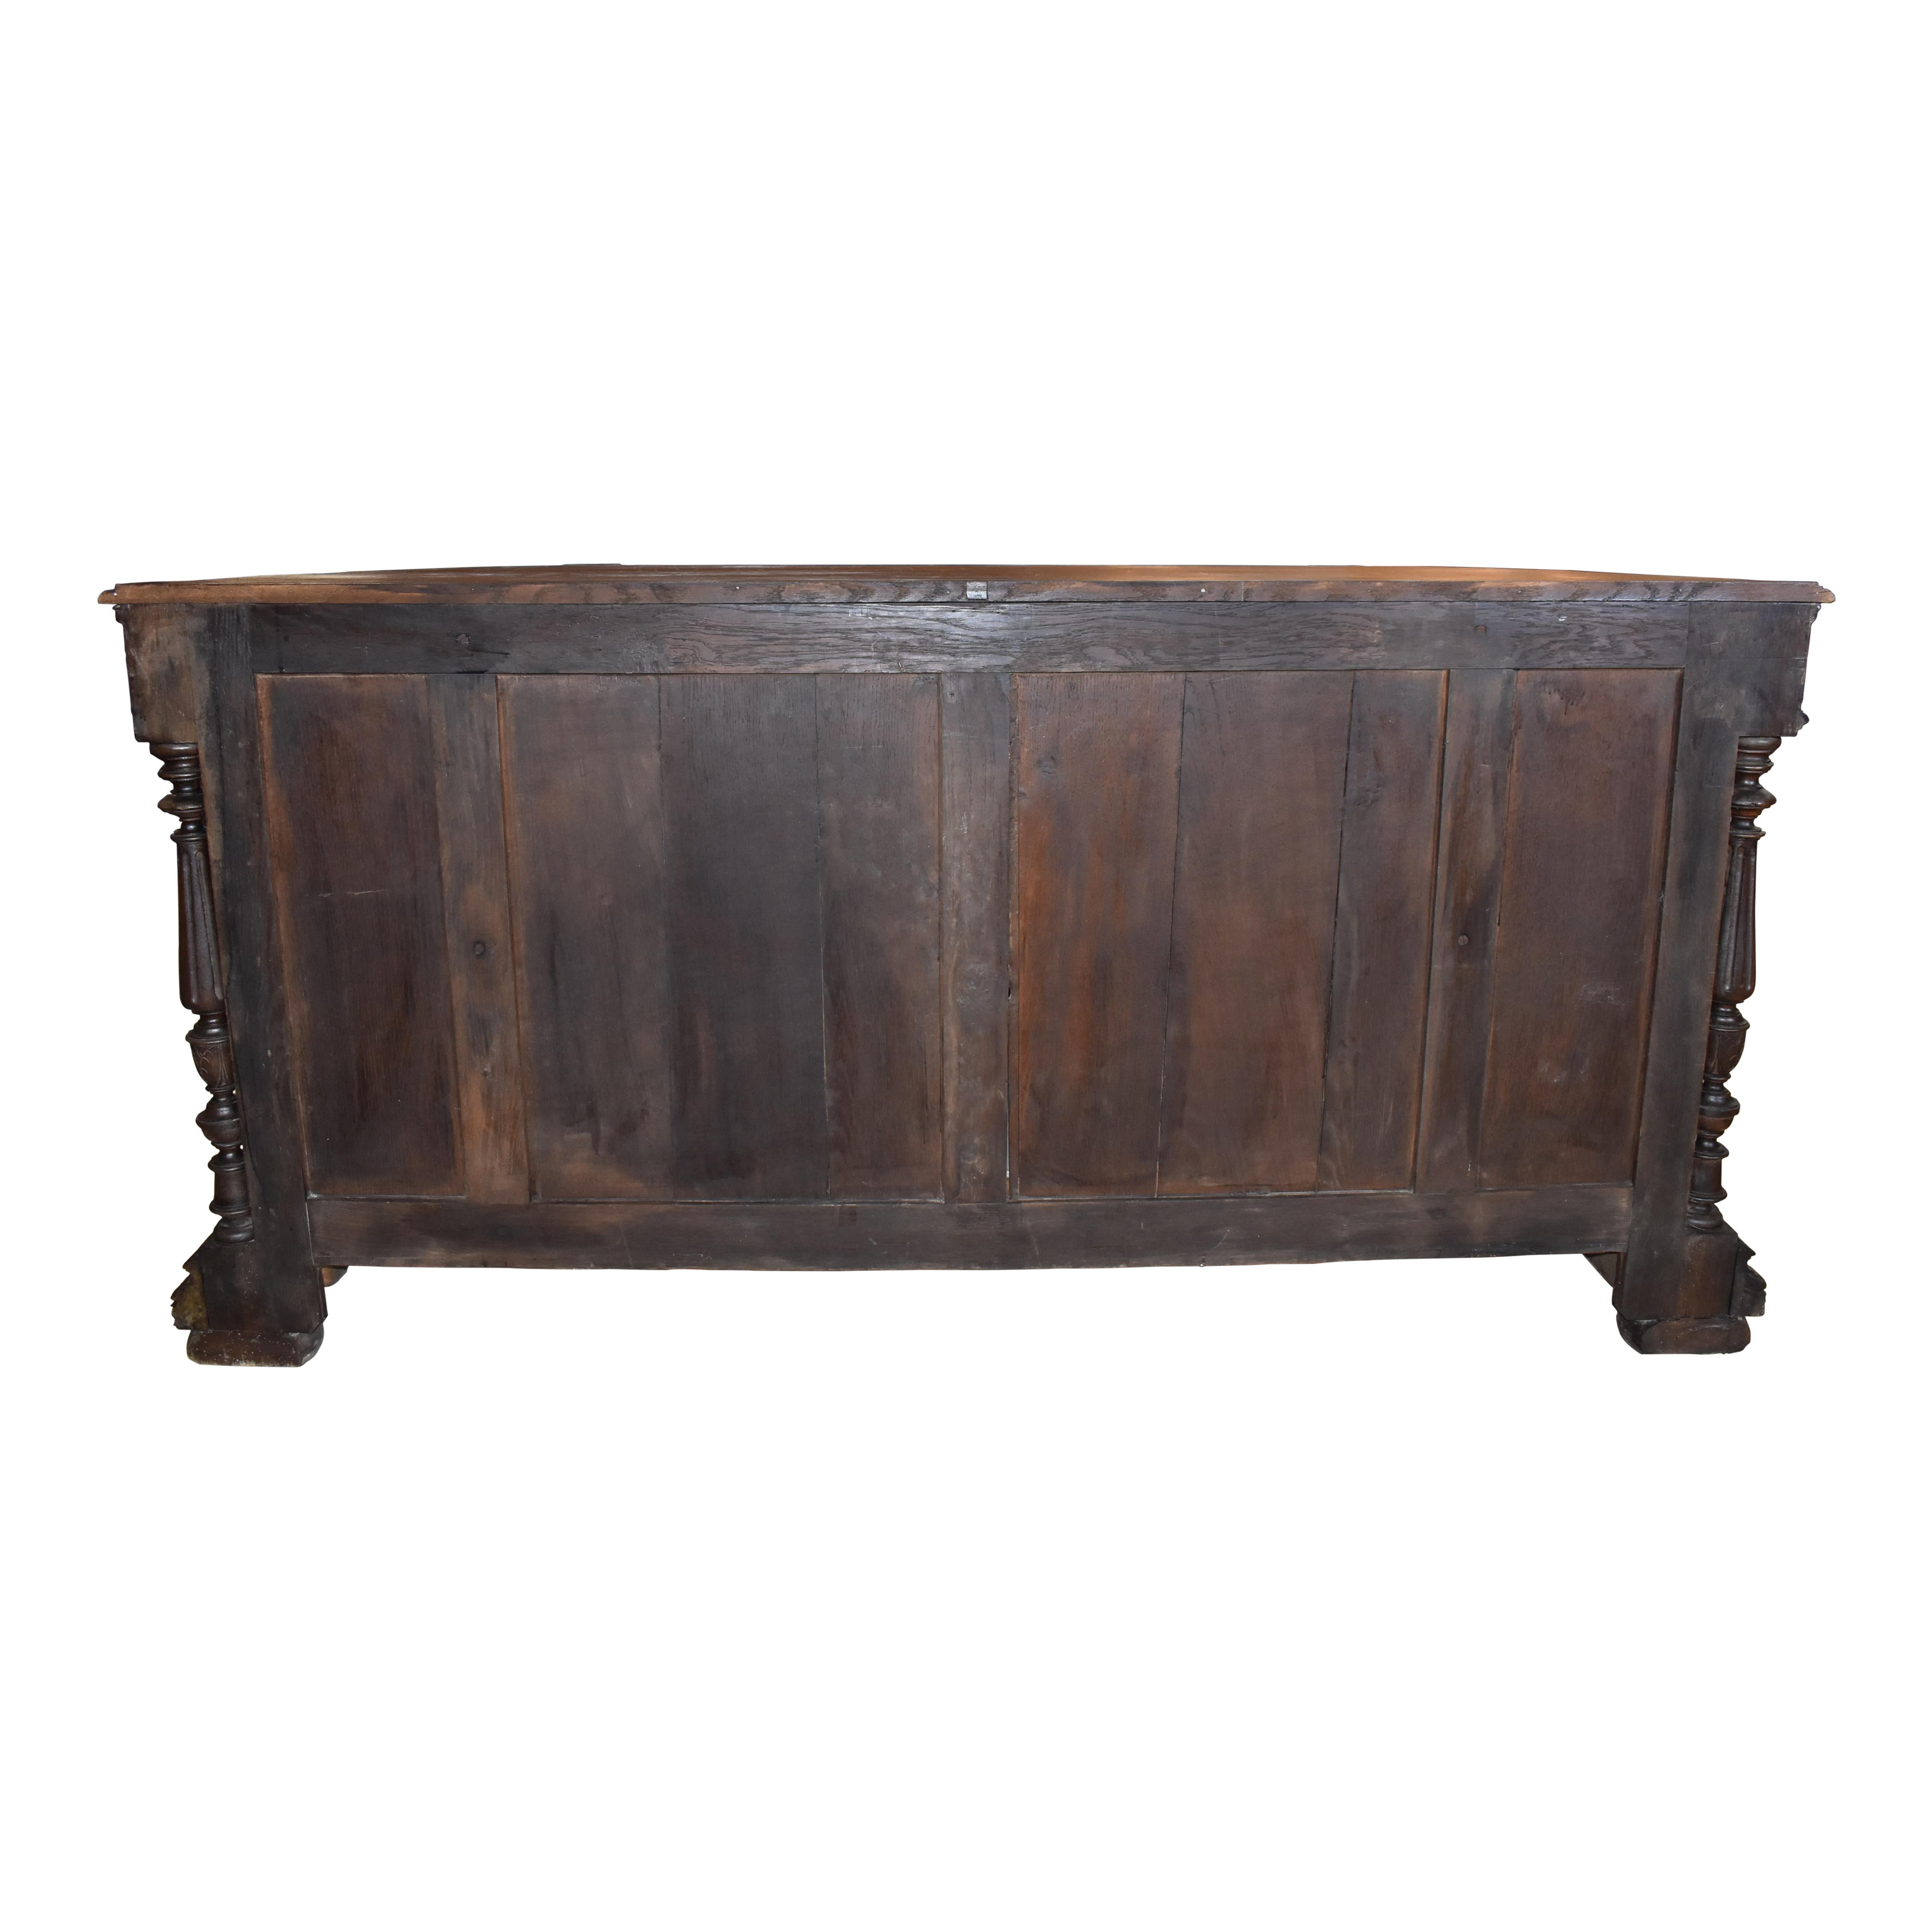 French Renaissance Revival Hunt Sideboard, circa 1895 For Sale 6